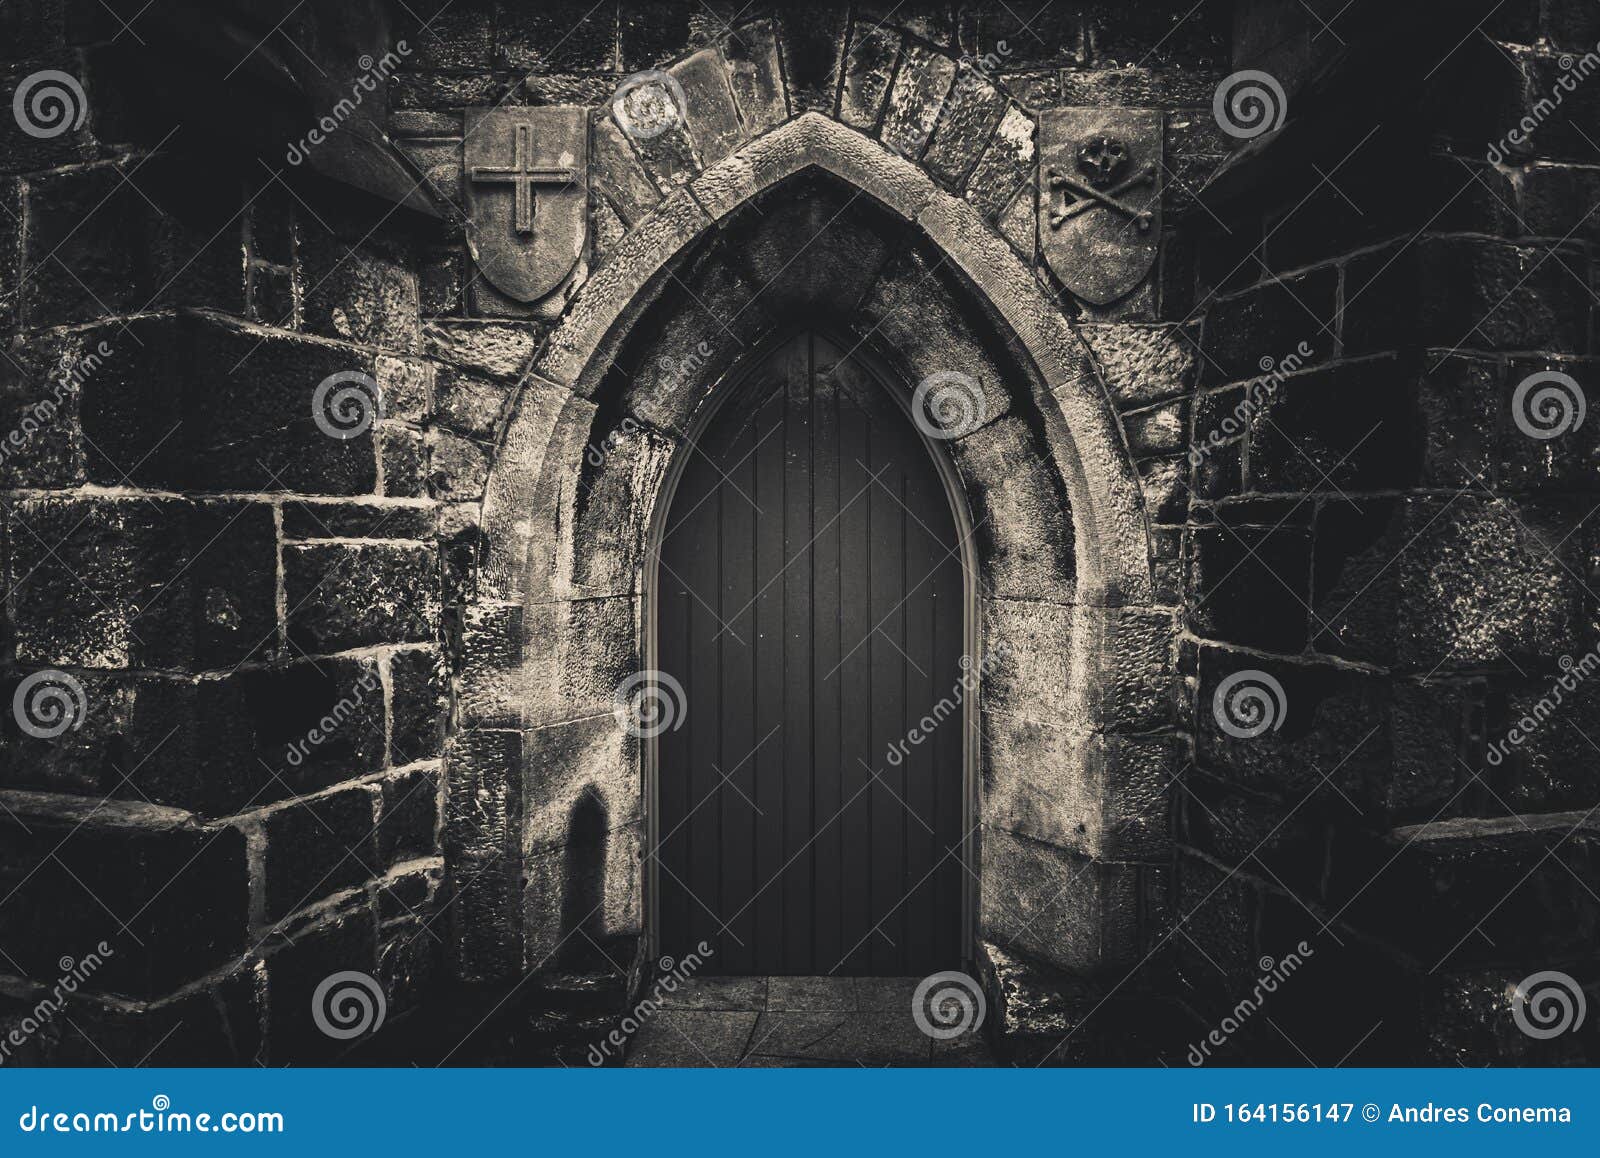 scary pointy wooden door in an old and wet stone wall building with cross, skull and bones at both sides in black and white.